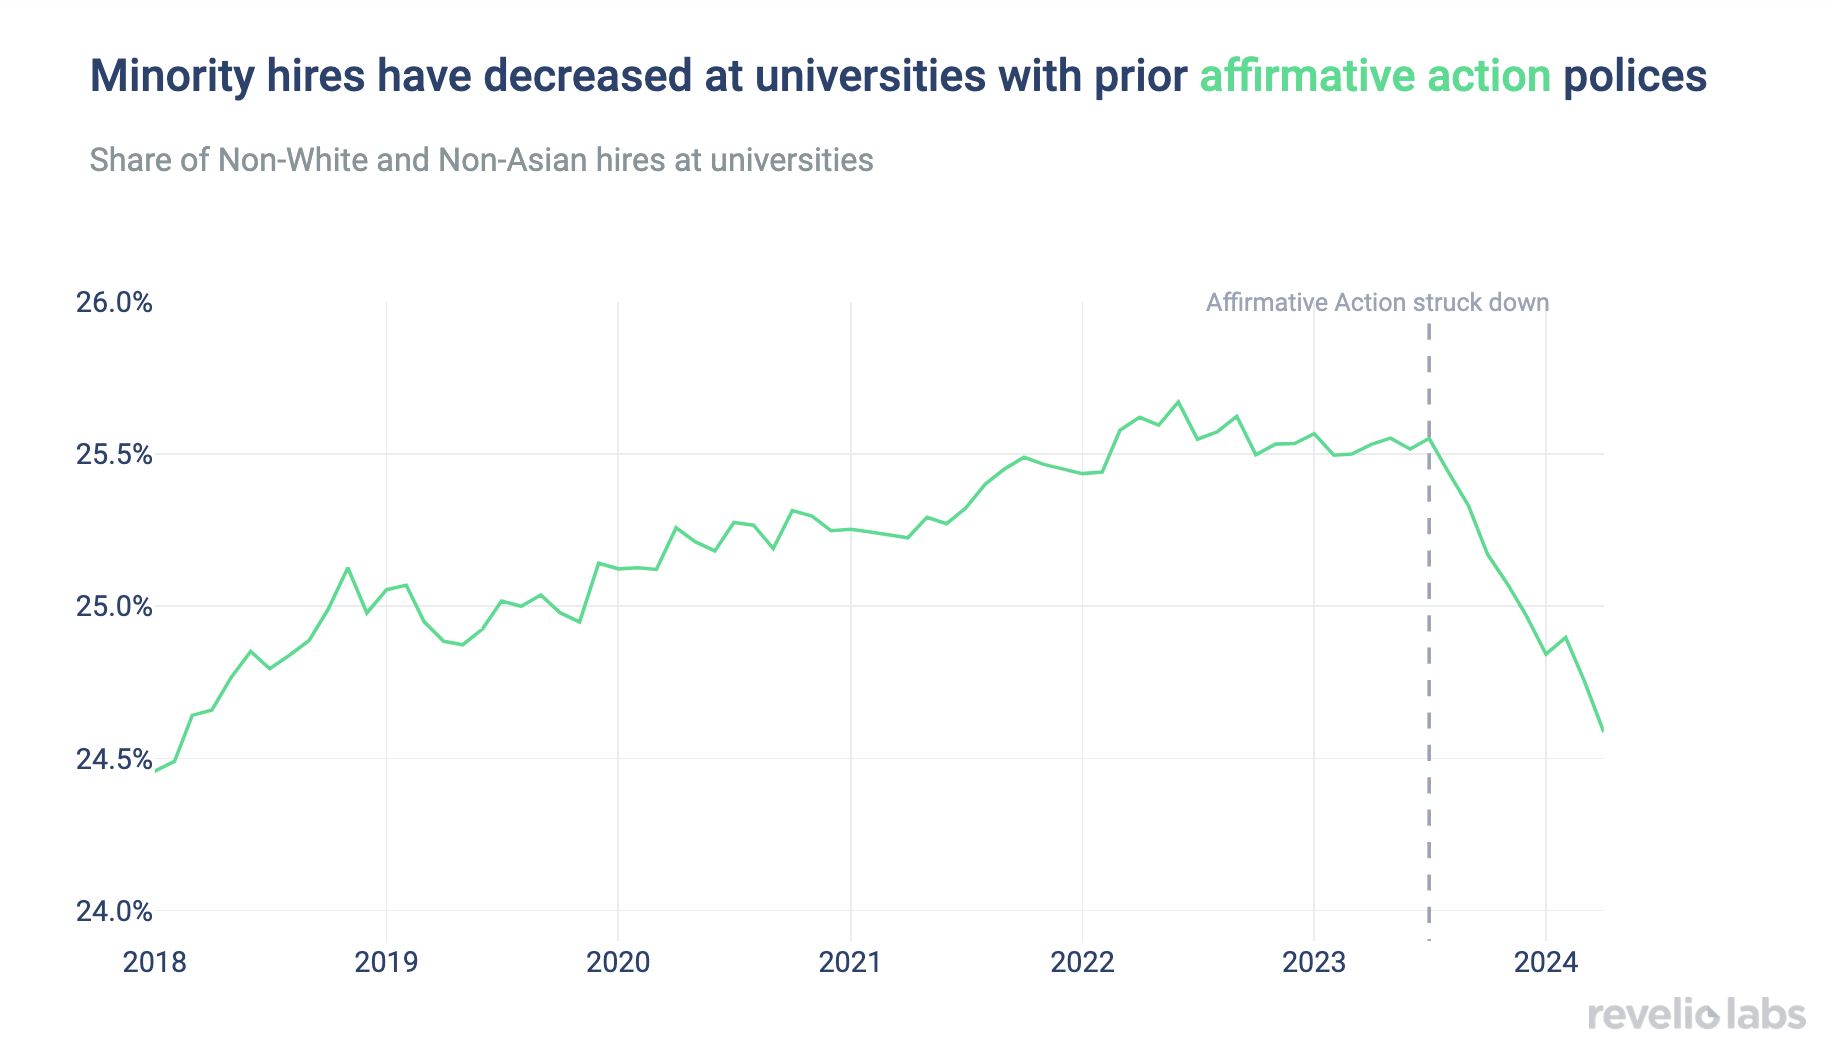 Minority hires have decreased at universities with prior affirmative action policies